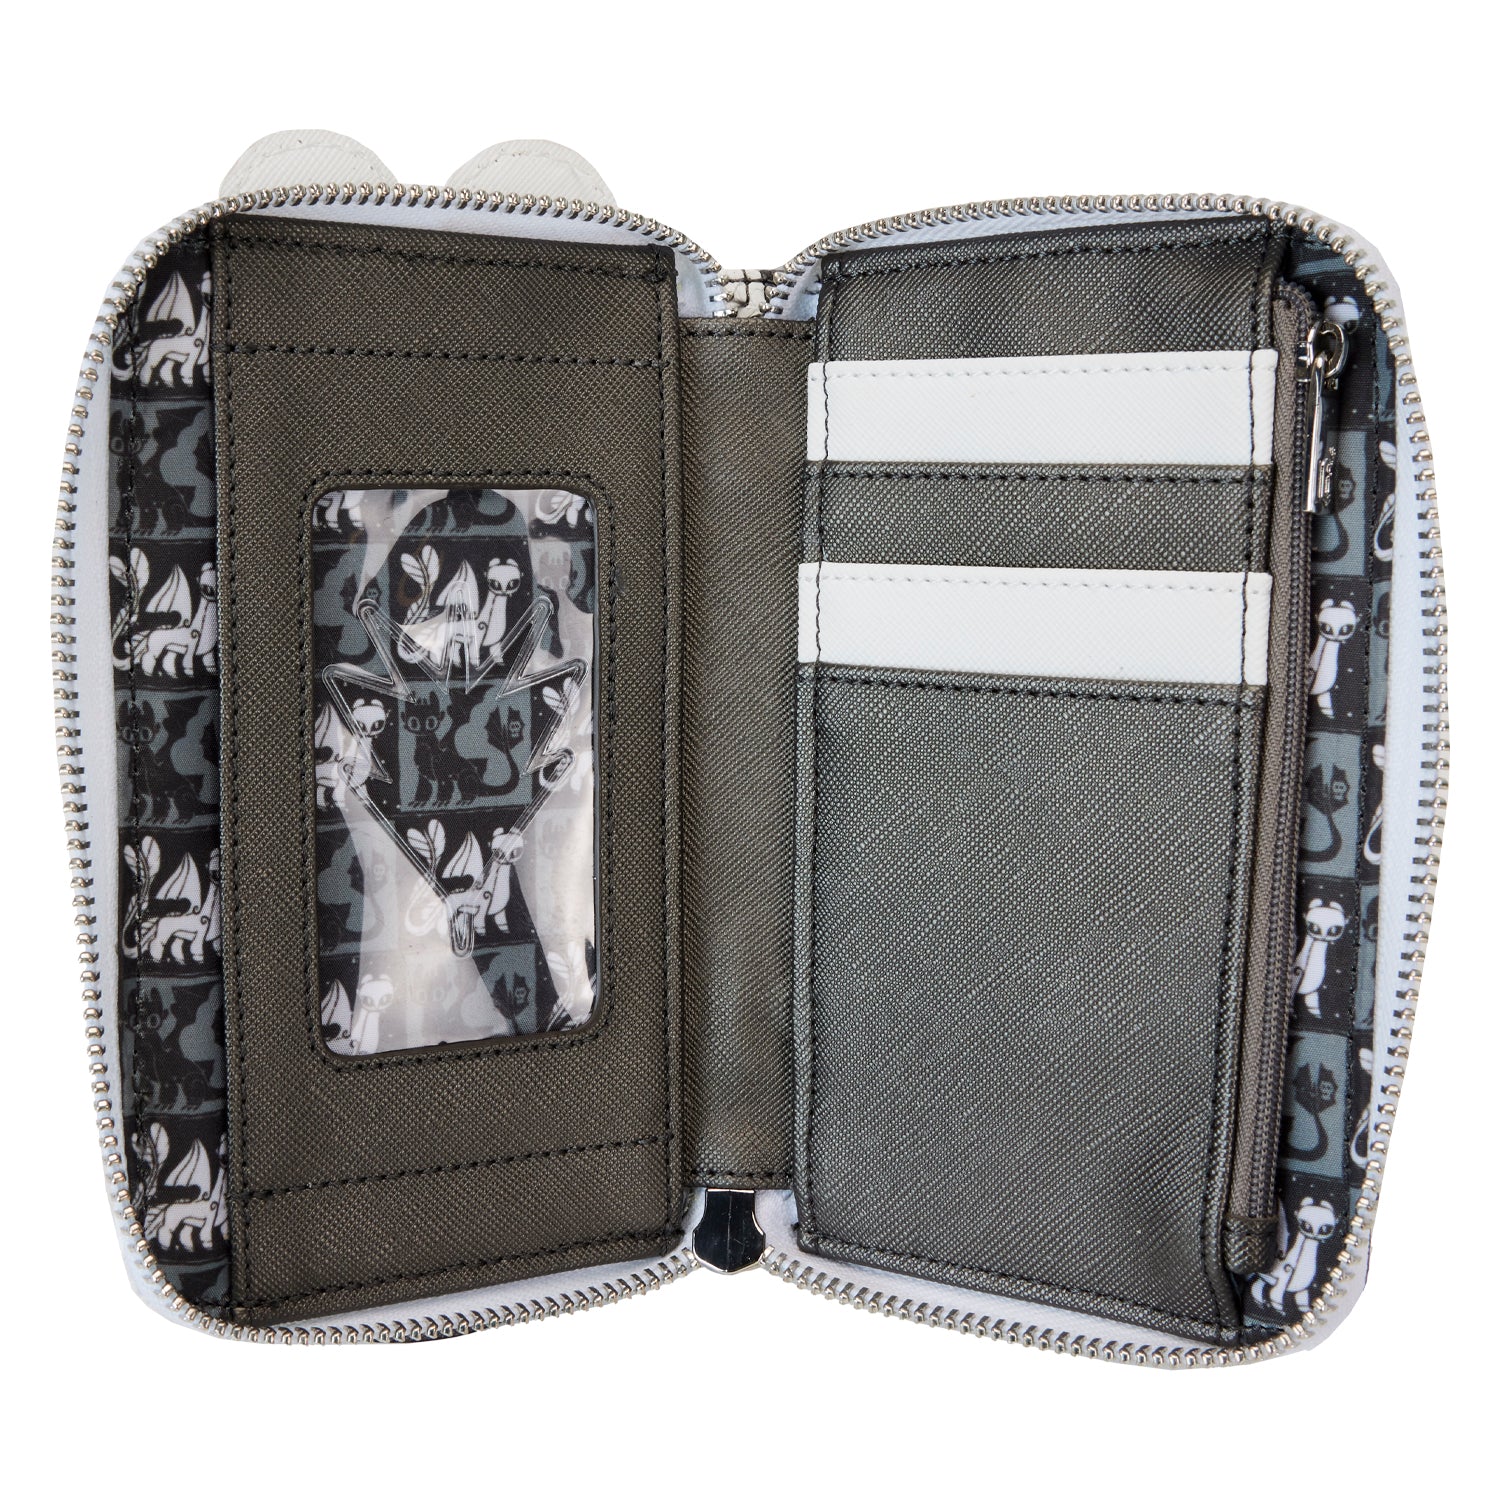 Loungefly x Dreamworks How To Train Your Dragon Furies Wallet